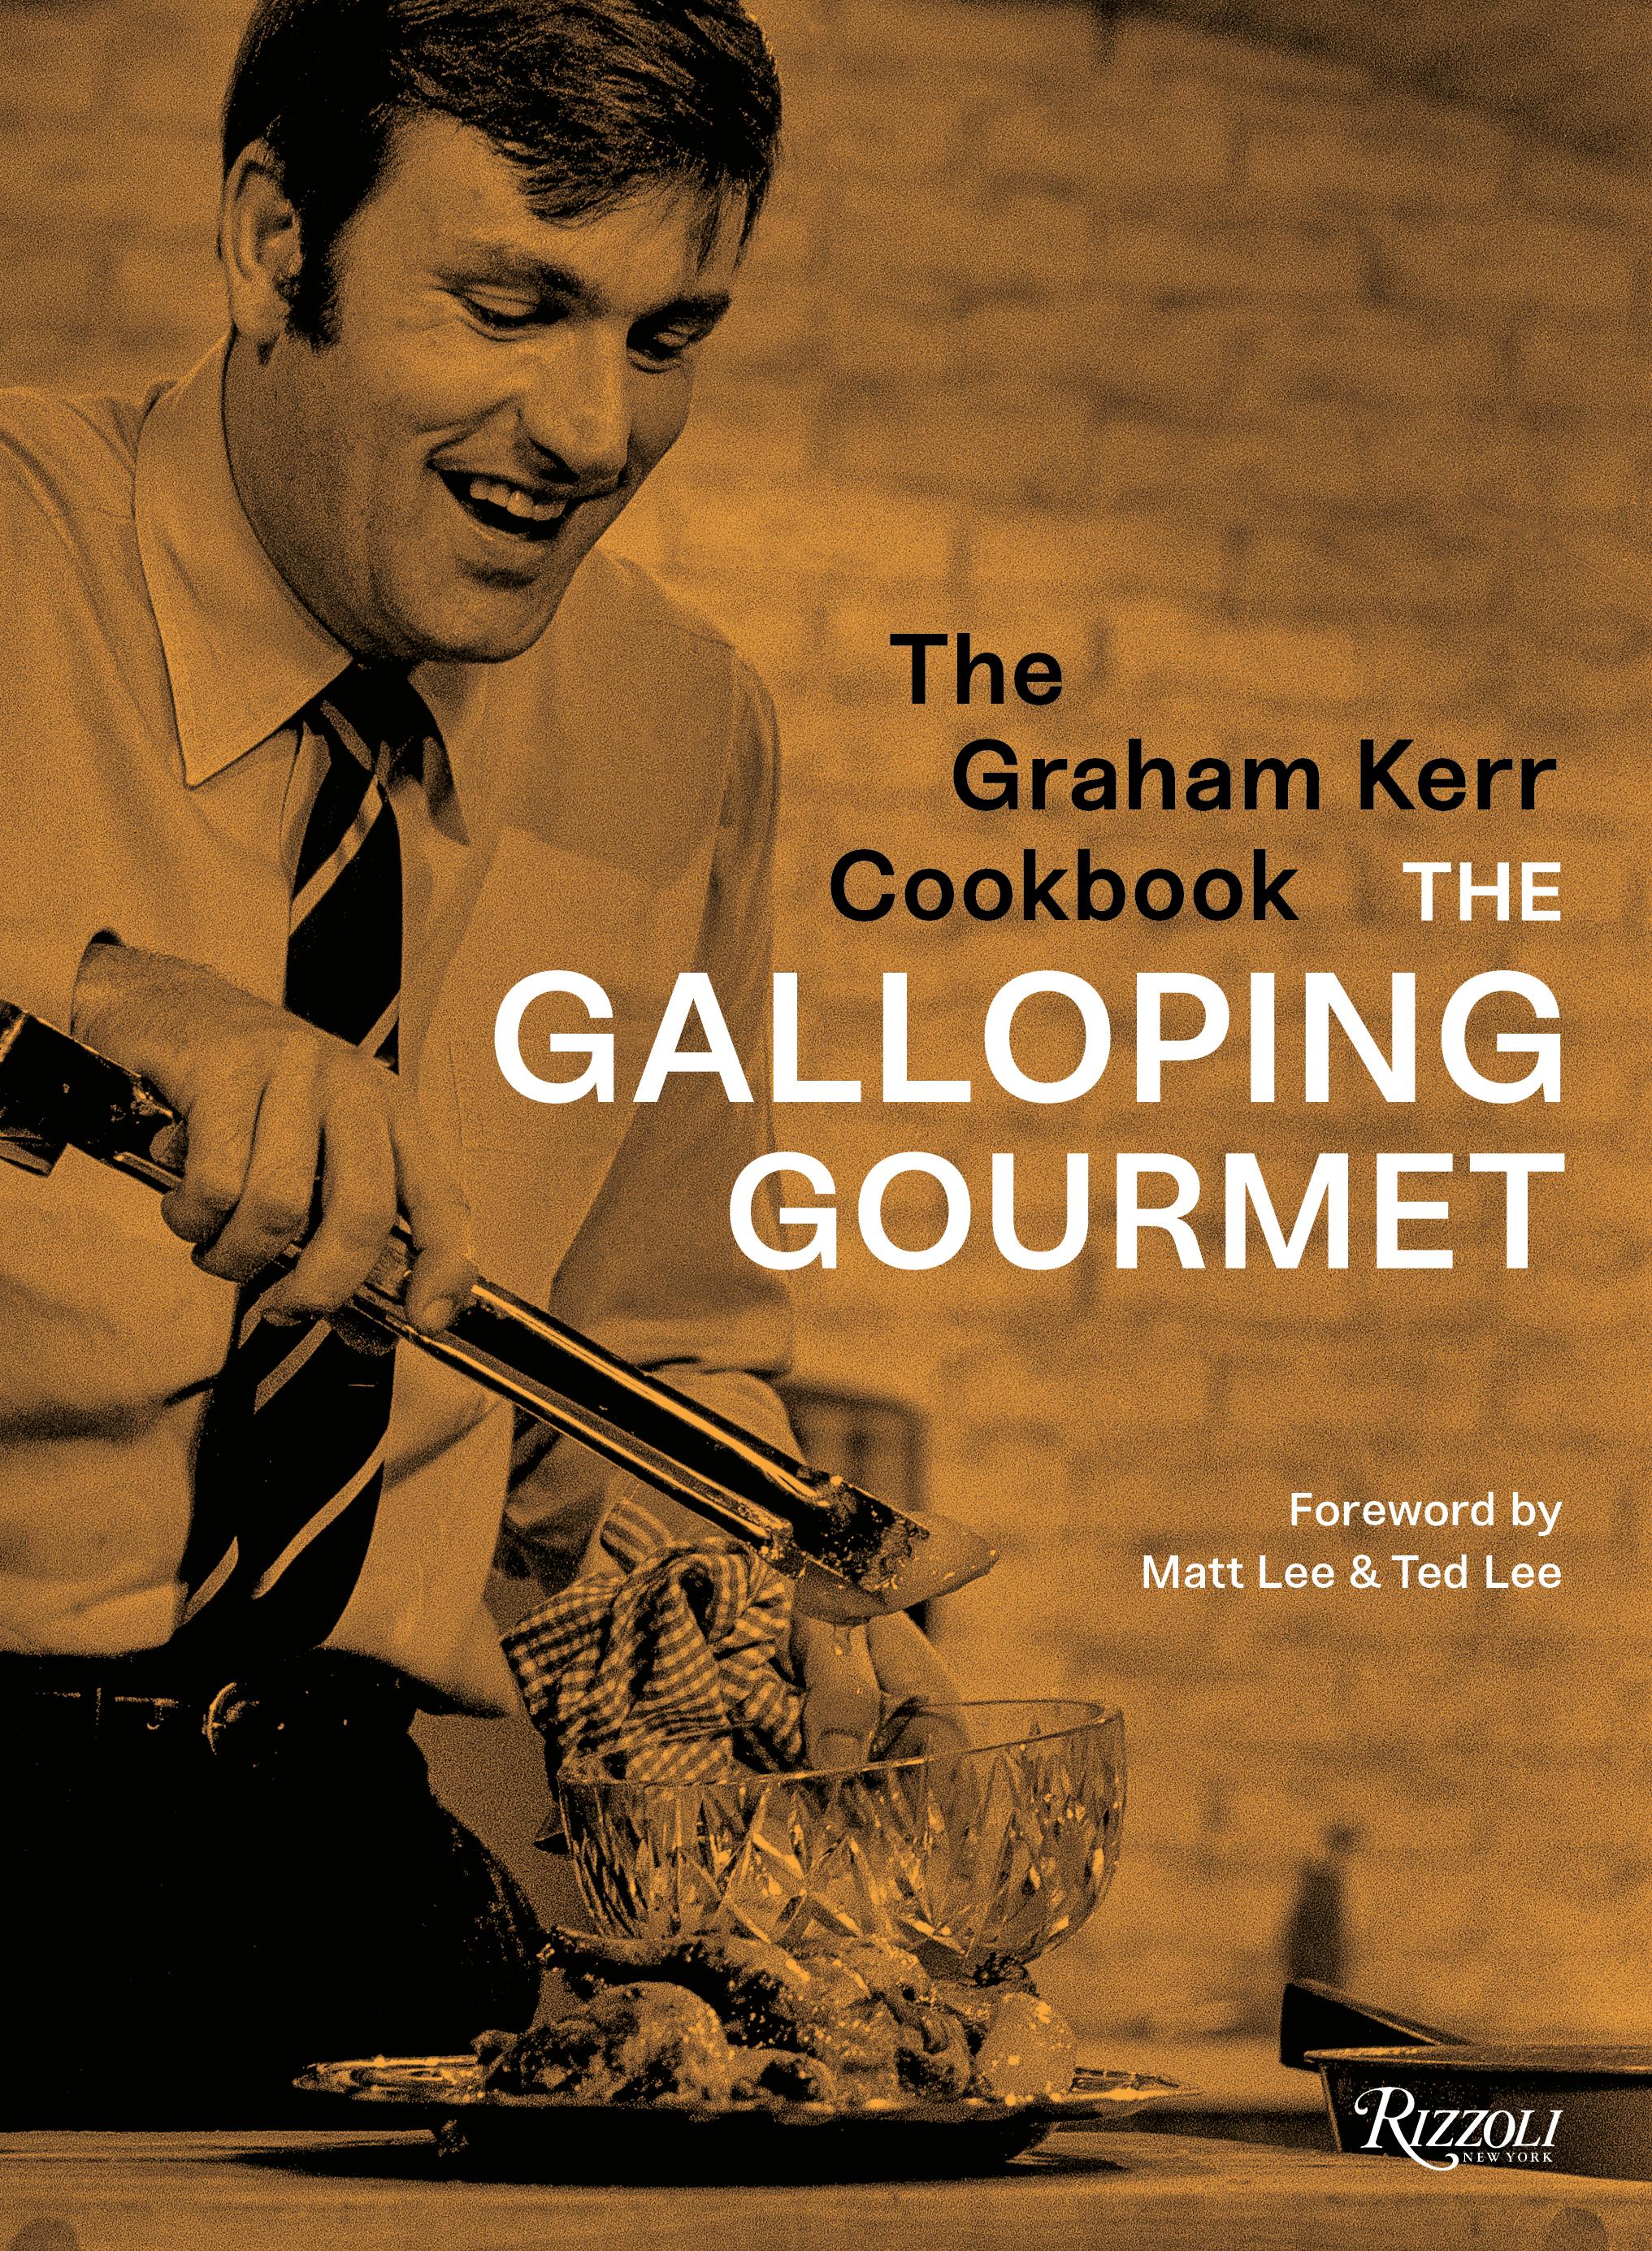 Remember The Galloping Gourmet Graham Kerr Lives In Wa And We Talked